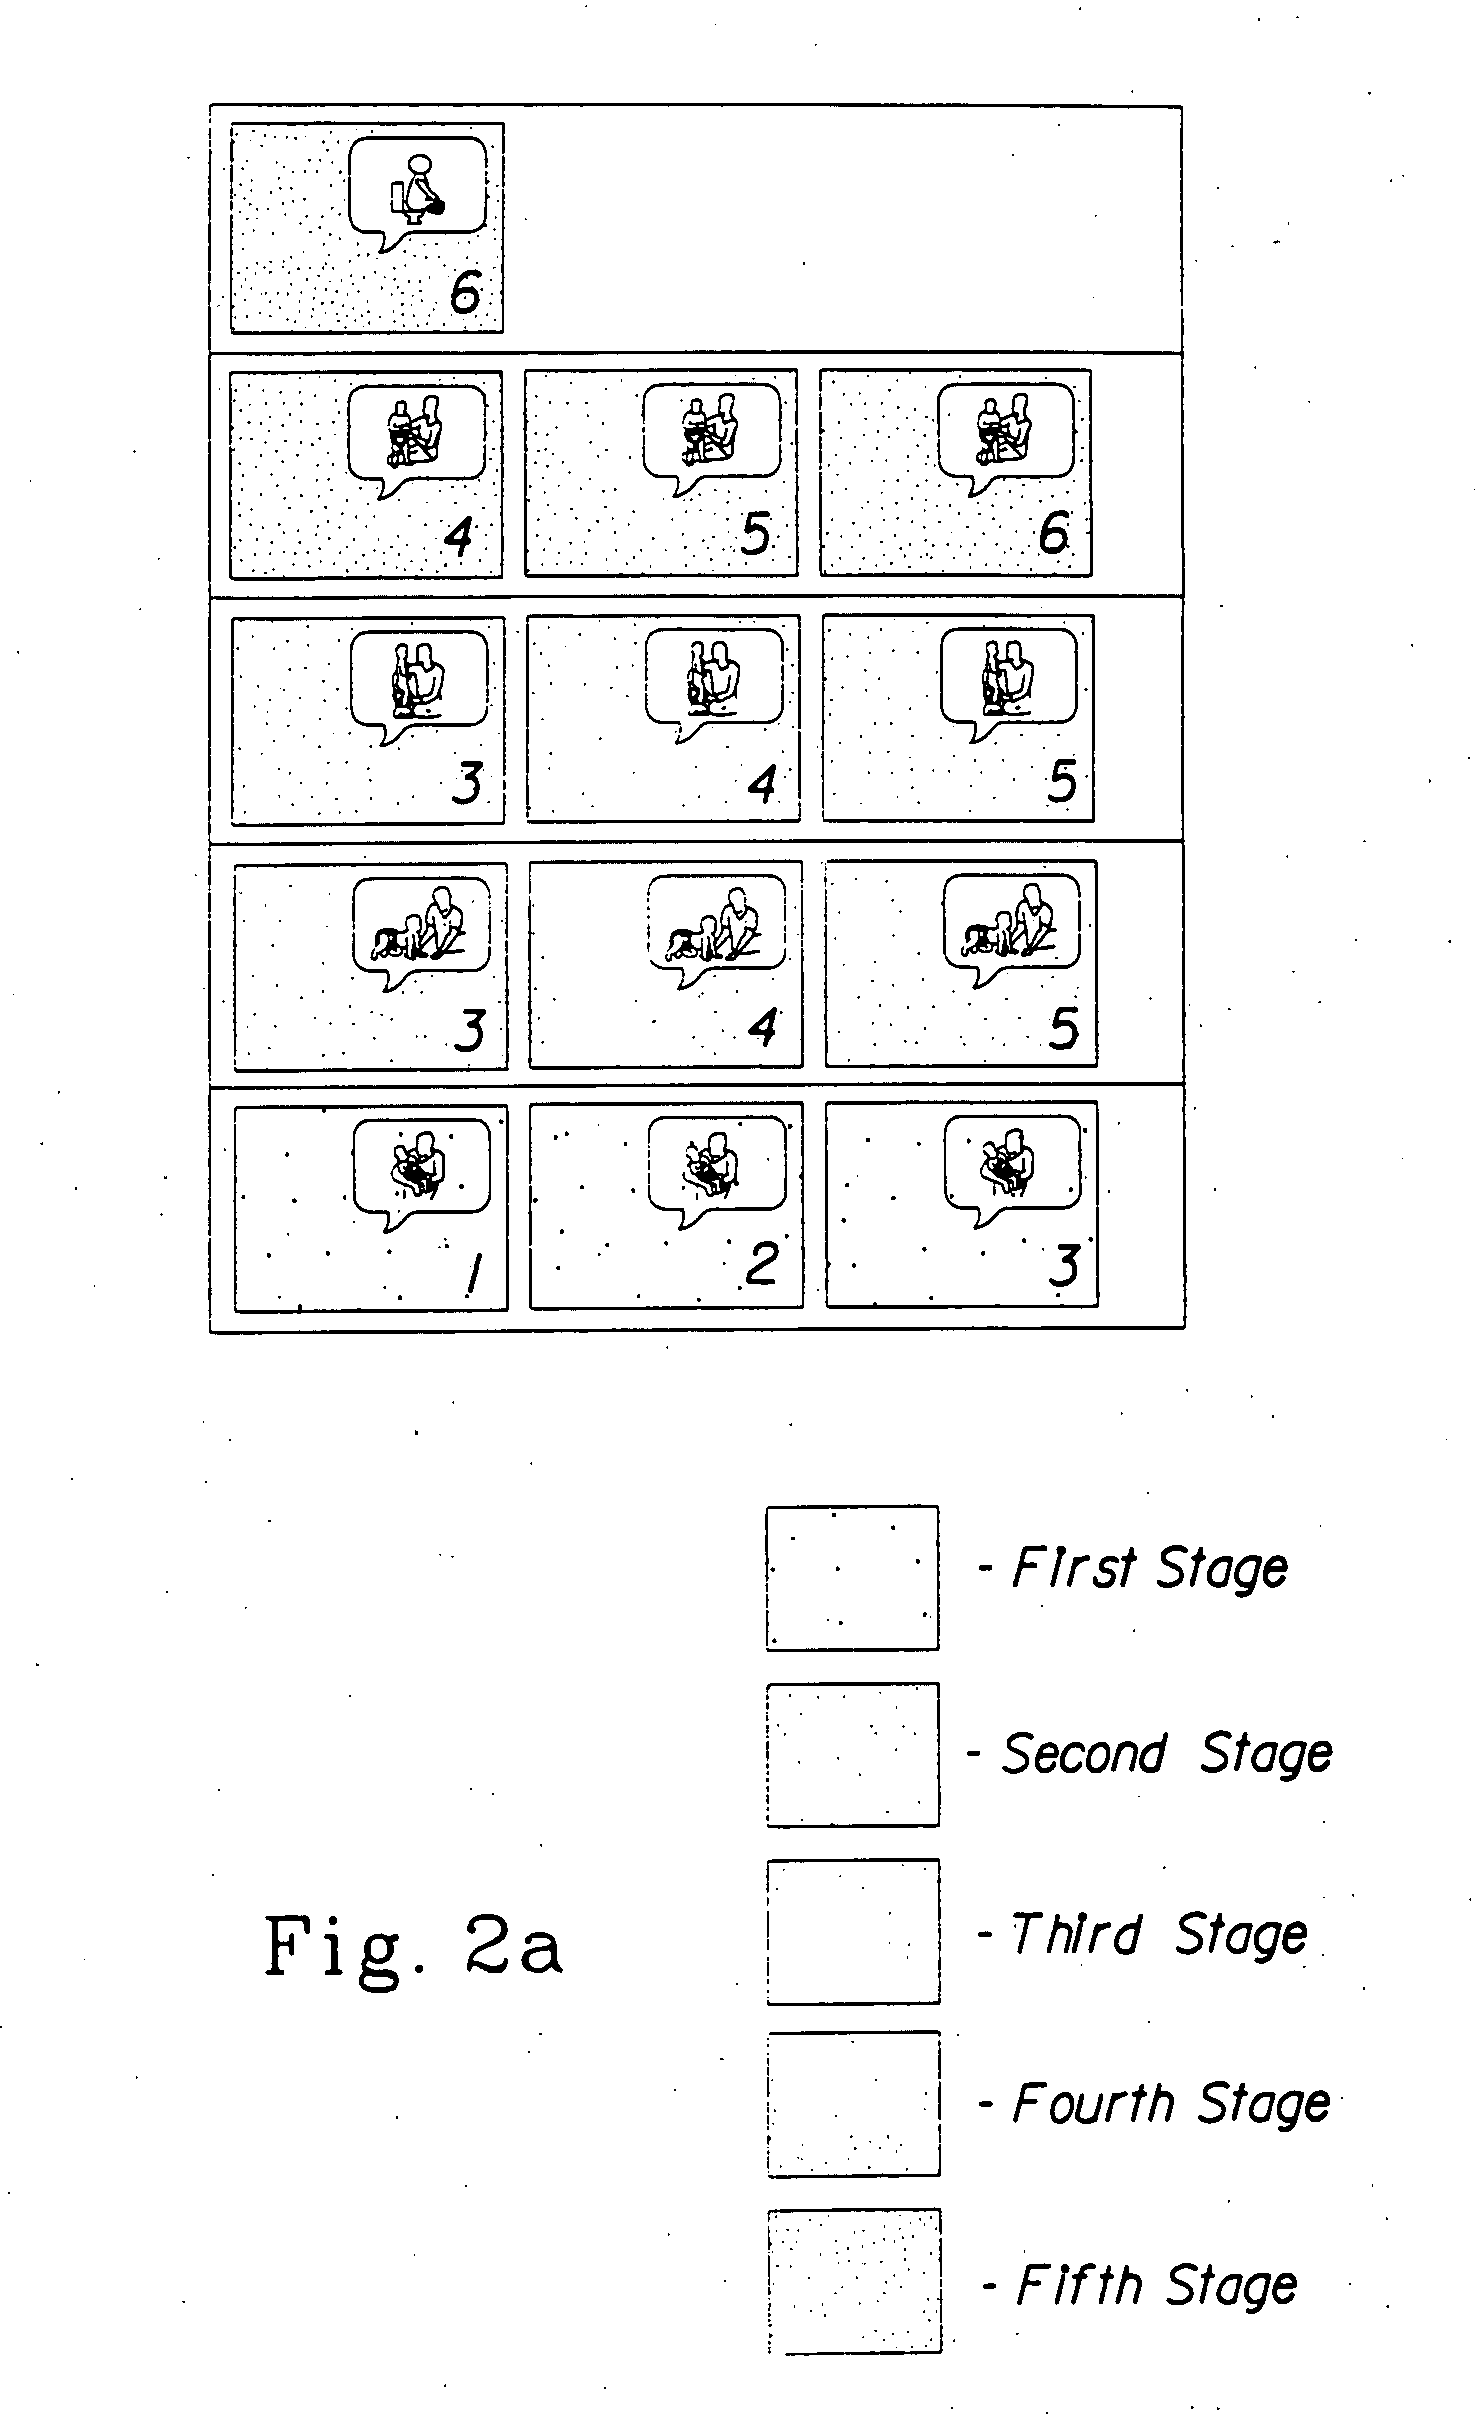 Merchandise display system for identifying disposable absorbent article configurations for wearers